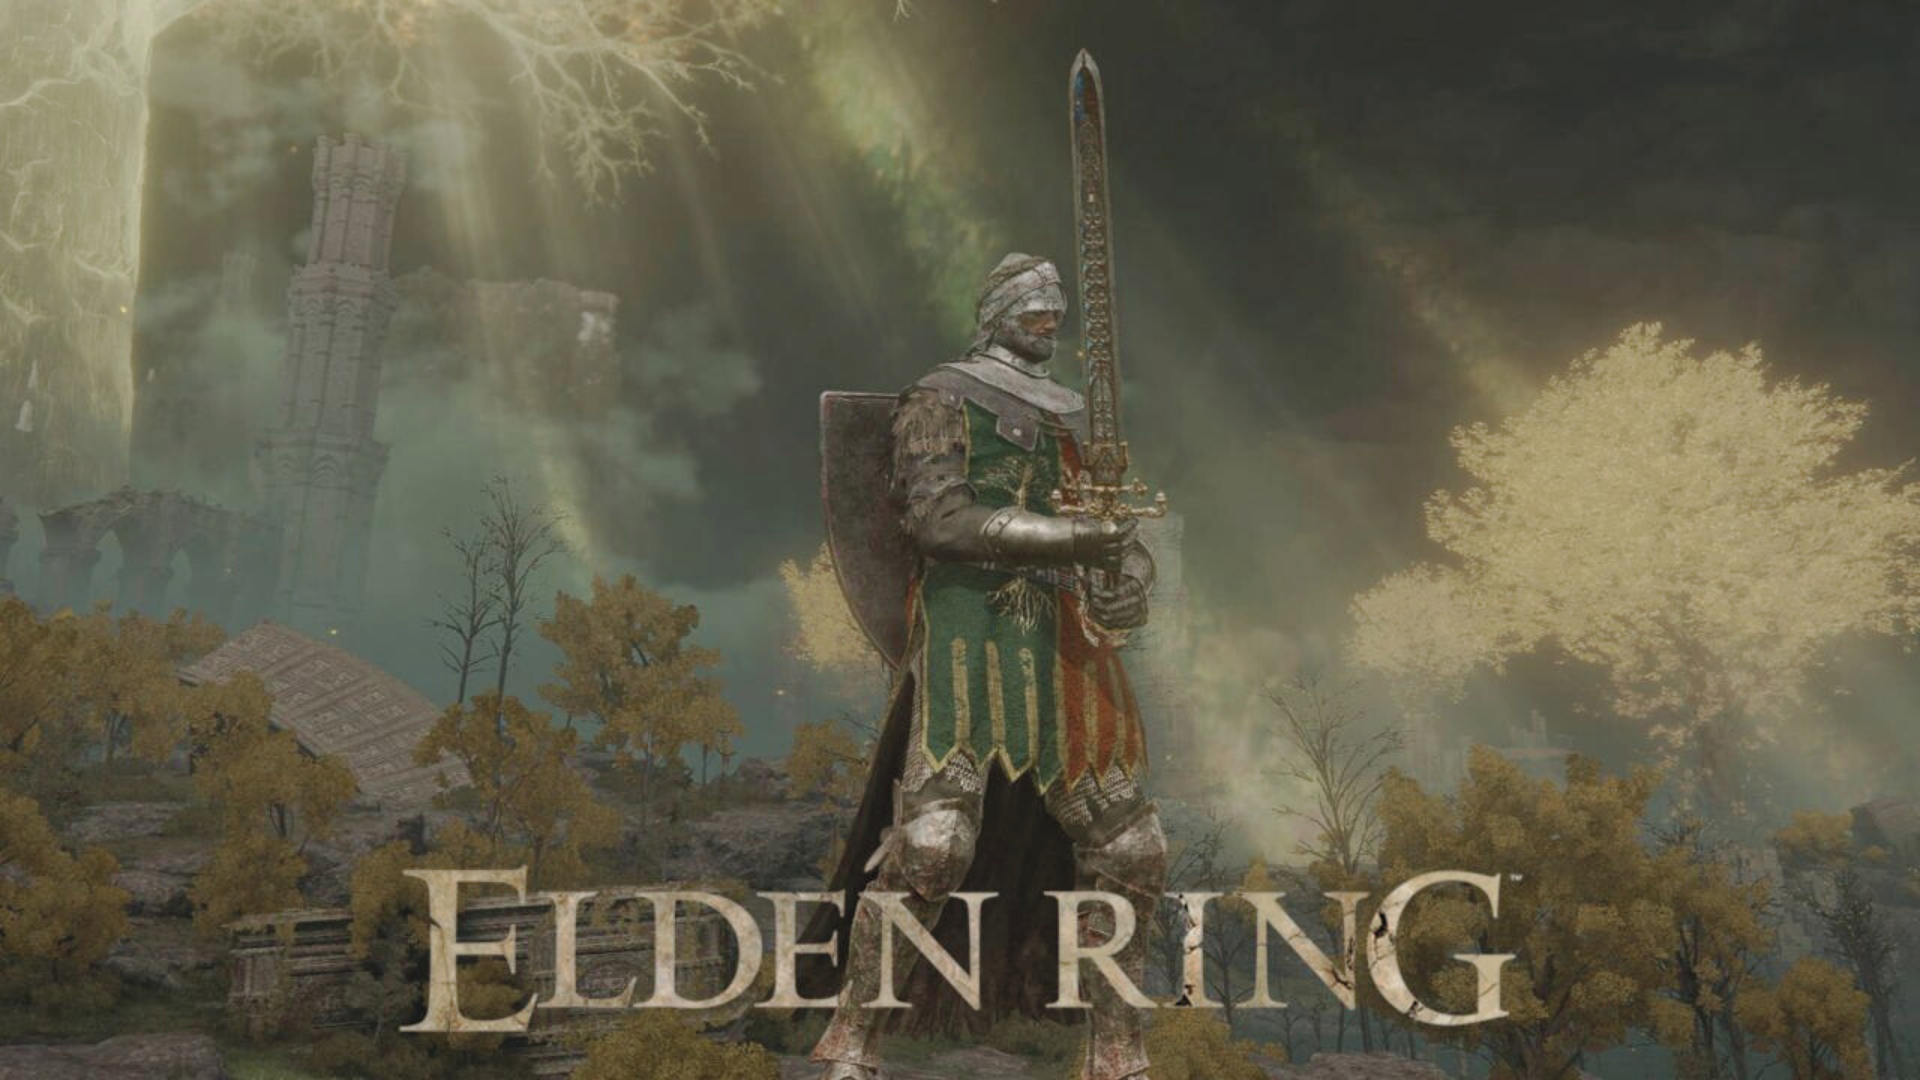 Image to illustrate the best classes in Elden Ring